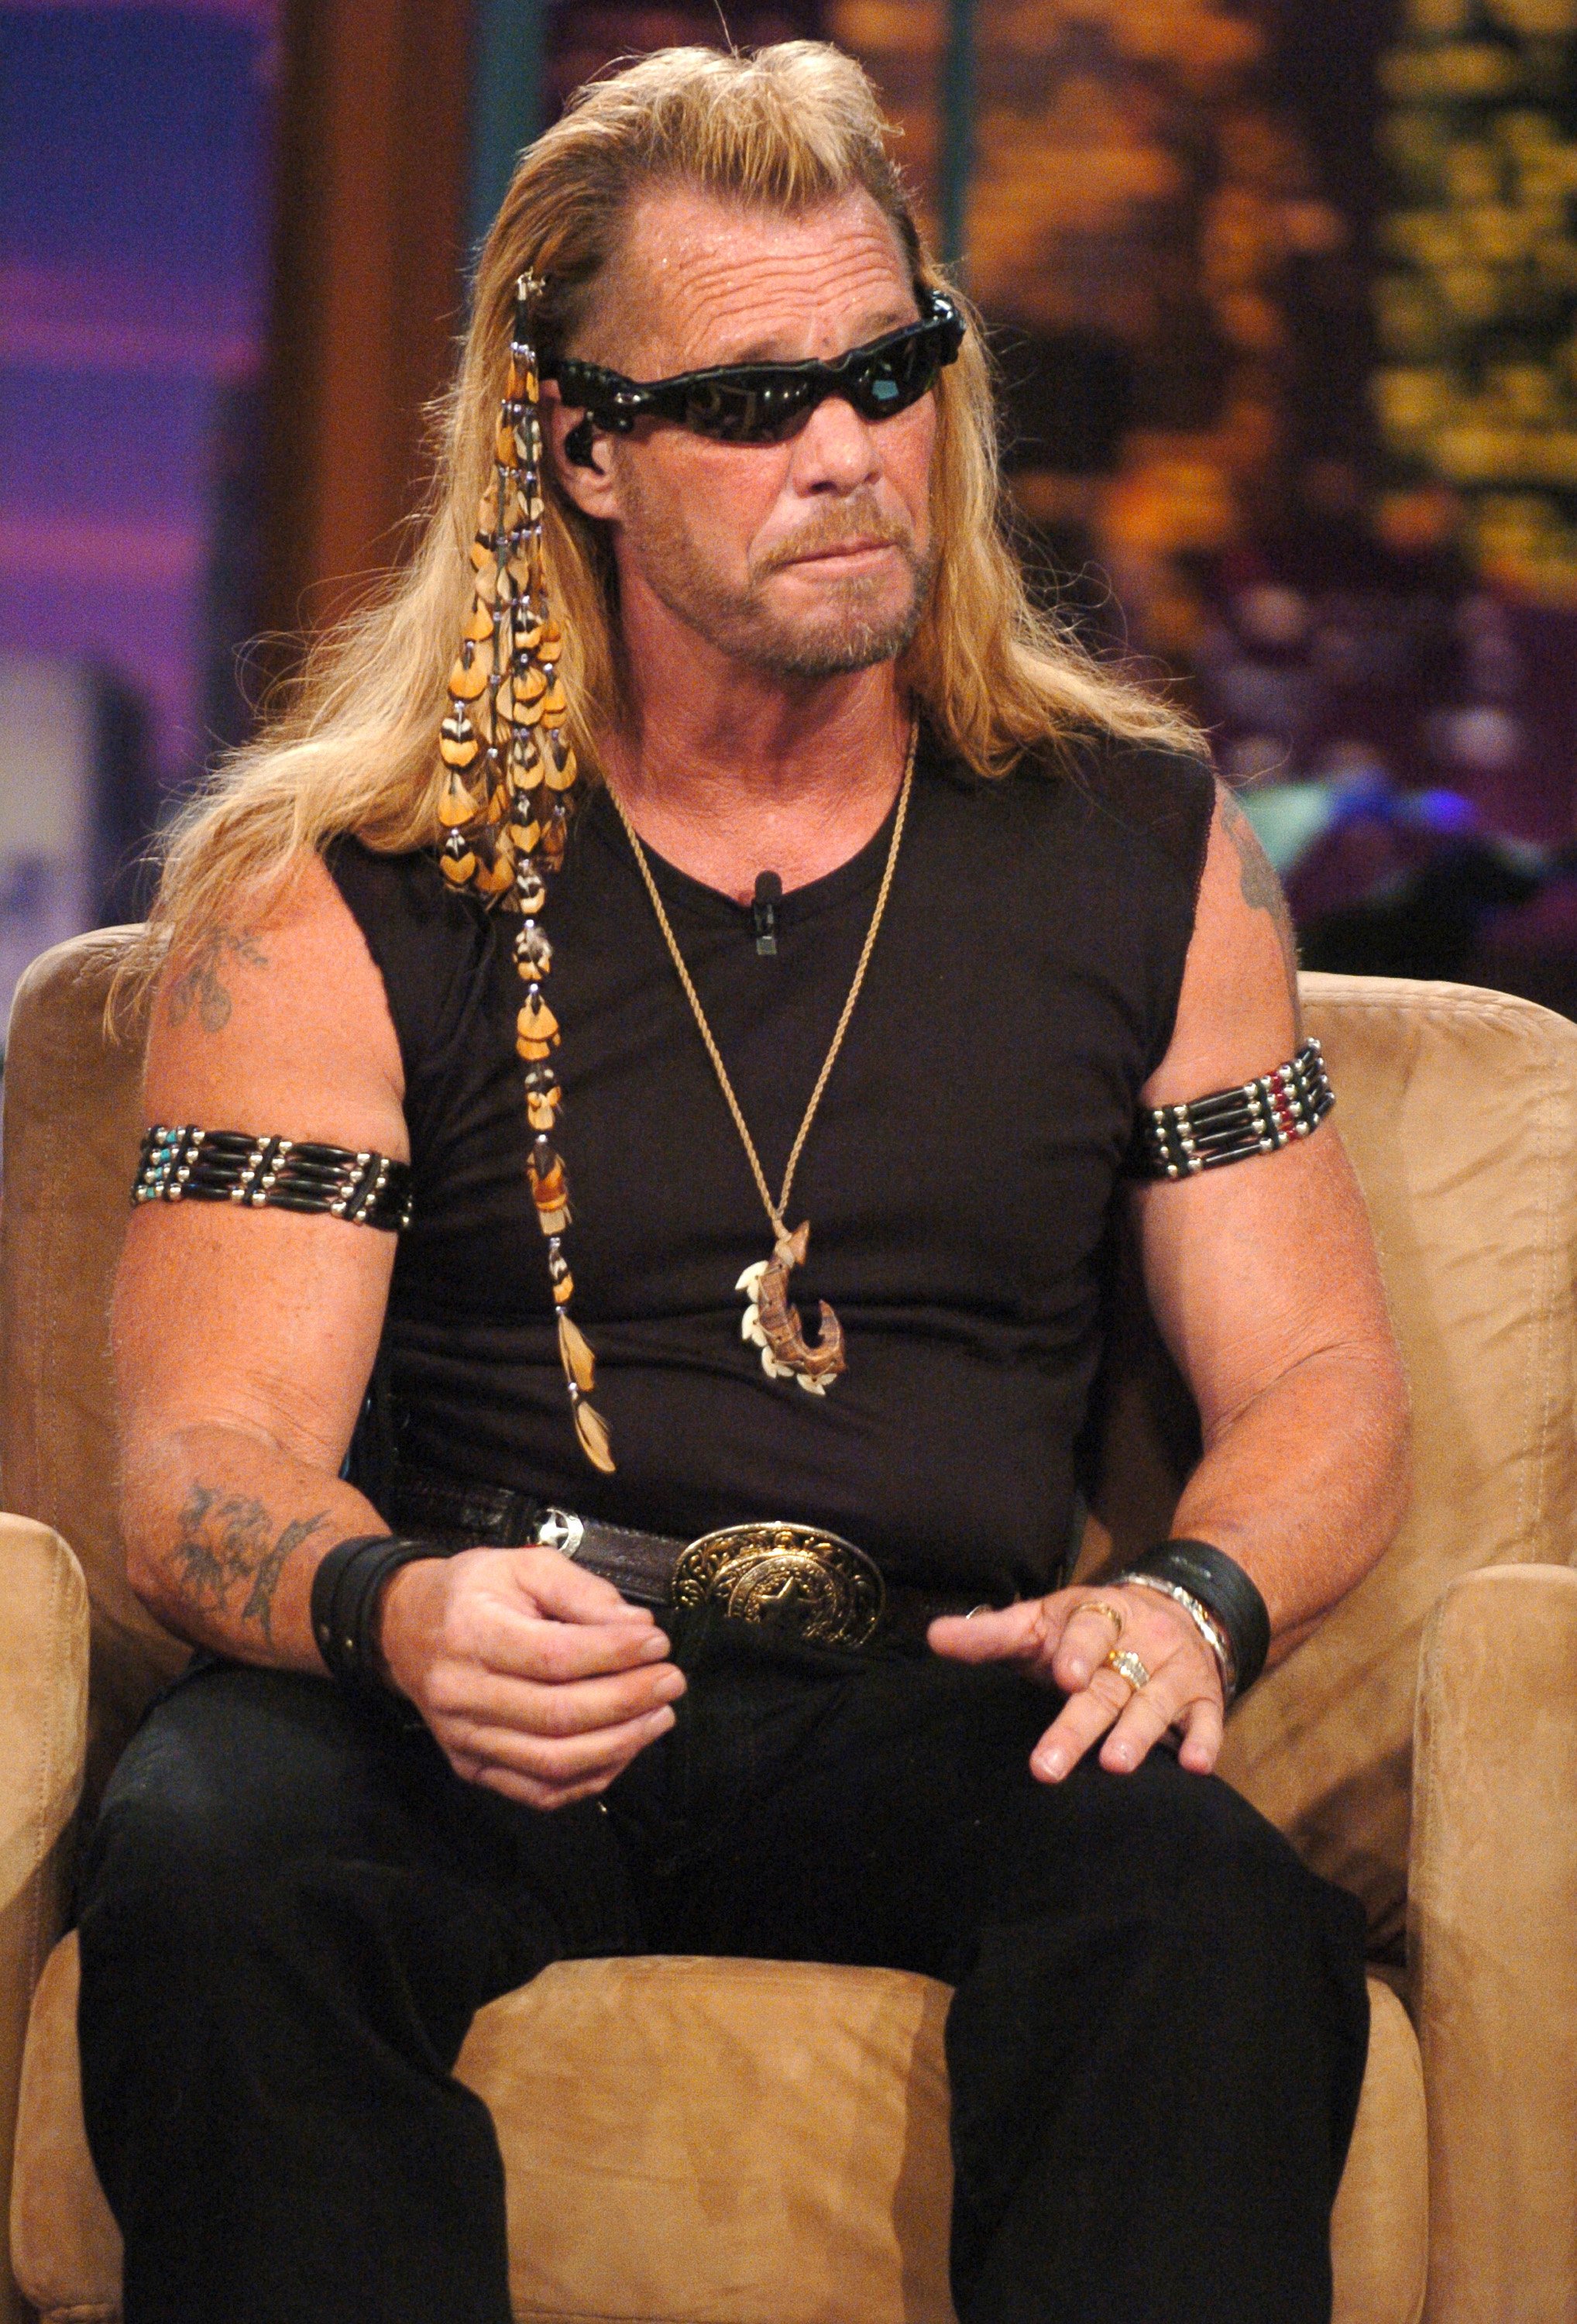 Duane "Dog" Chapman, the bounty hunter on June 15, 2005 | Photo: Getty Images